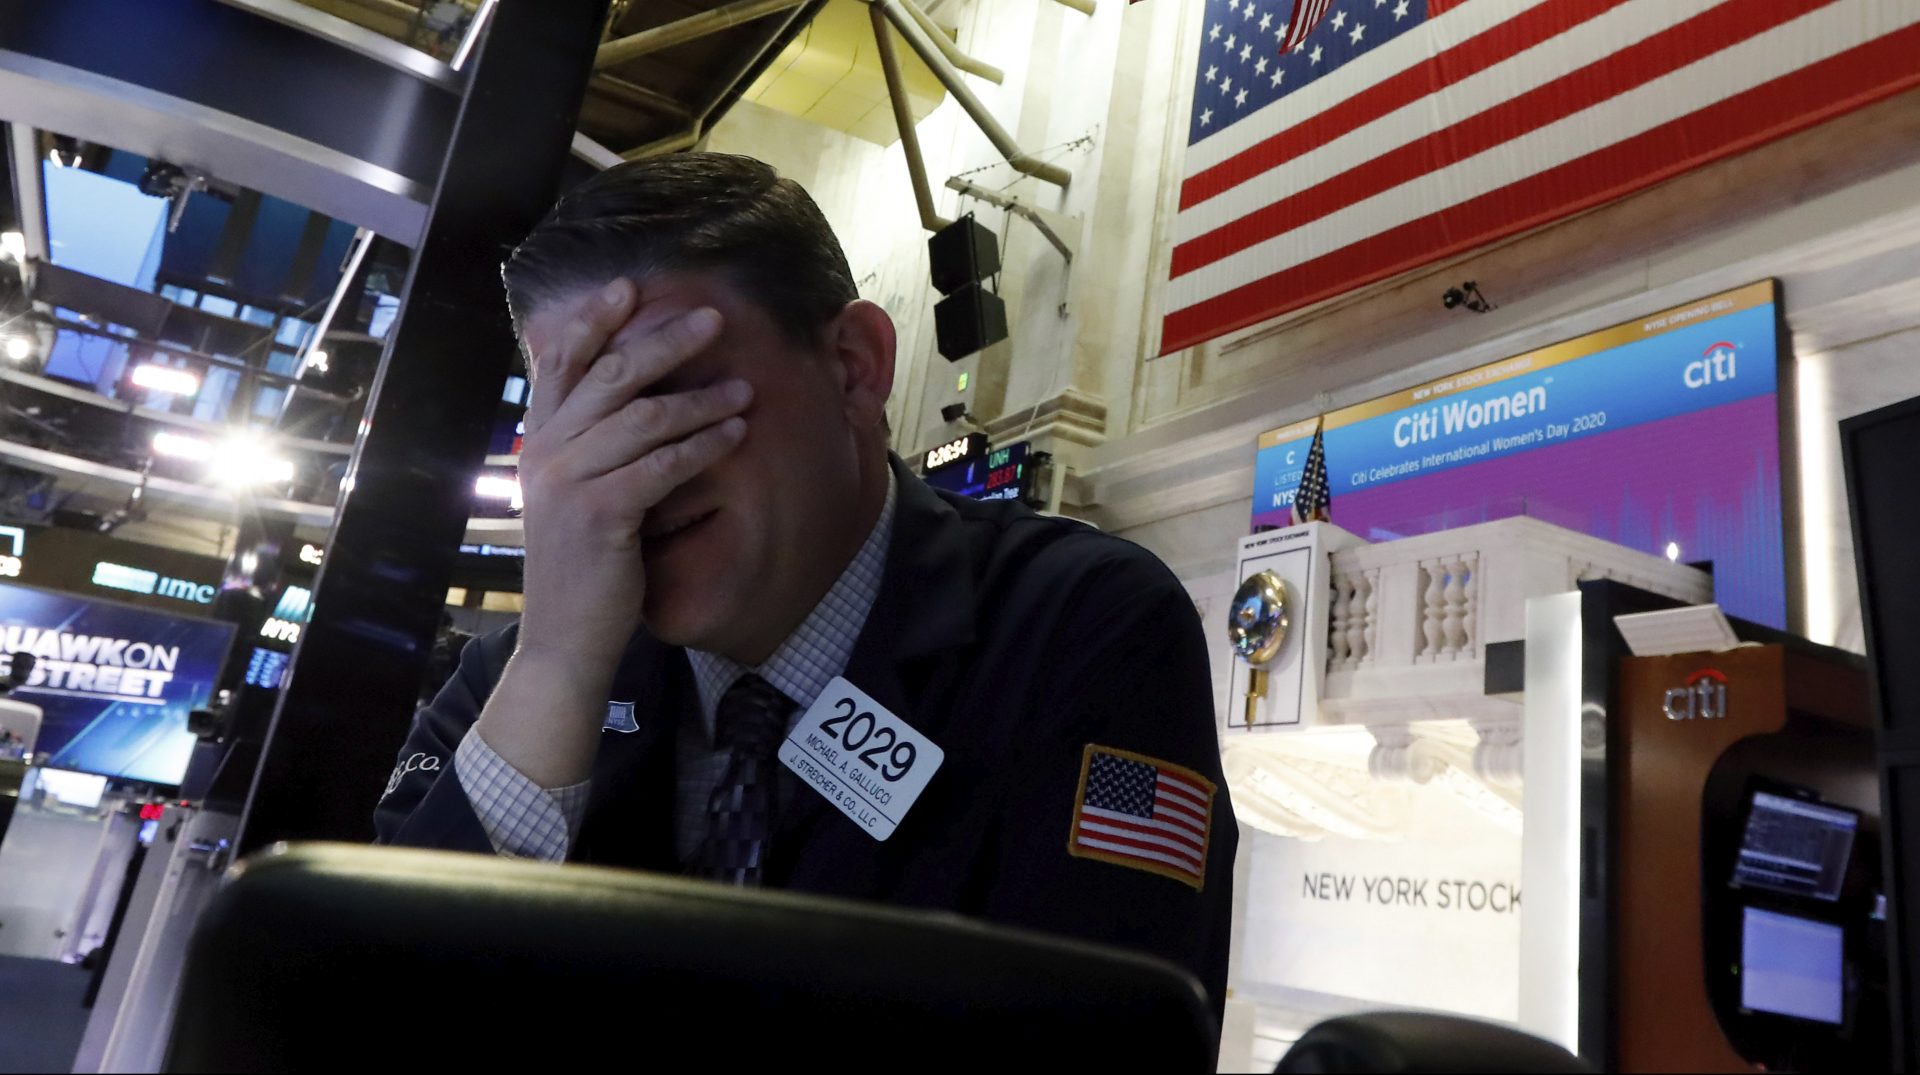 Dow dives more than 2,000 points as worries grow over coronavirus impact | WITF